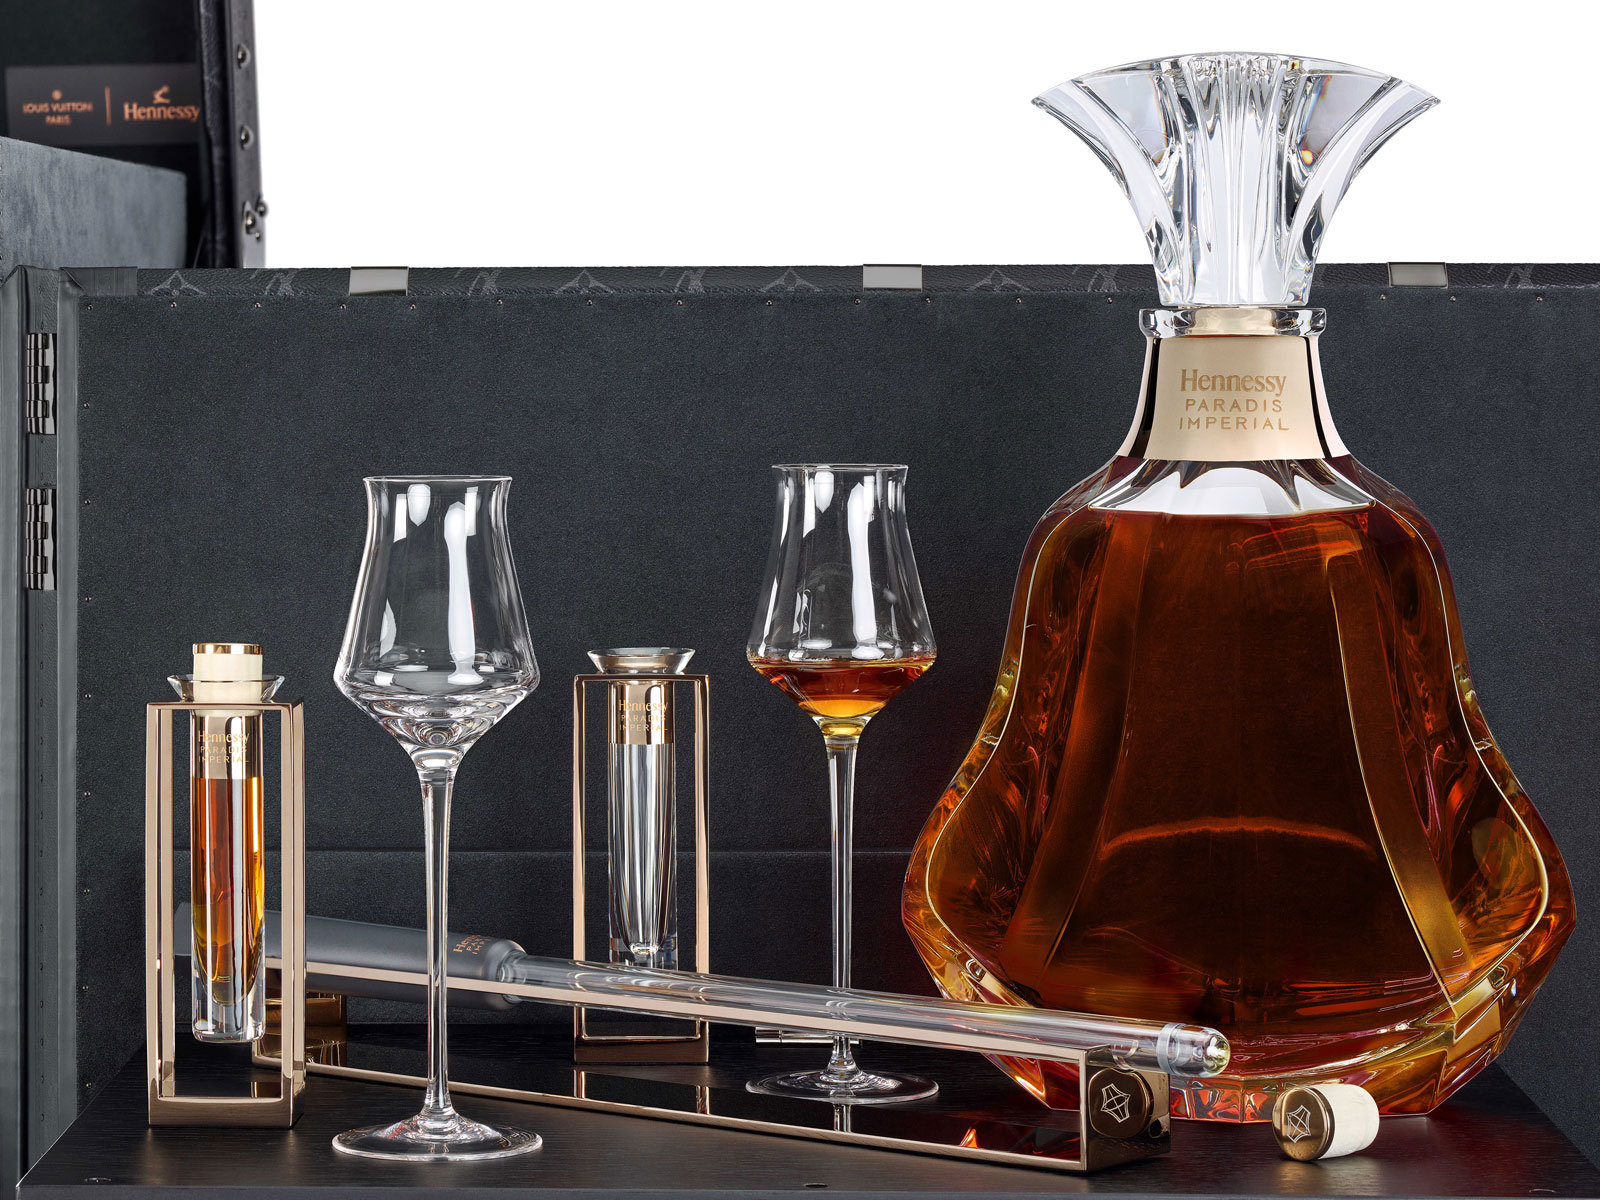 How Cognac Became a Status Symbol in China